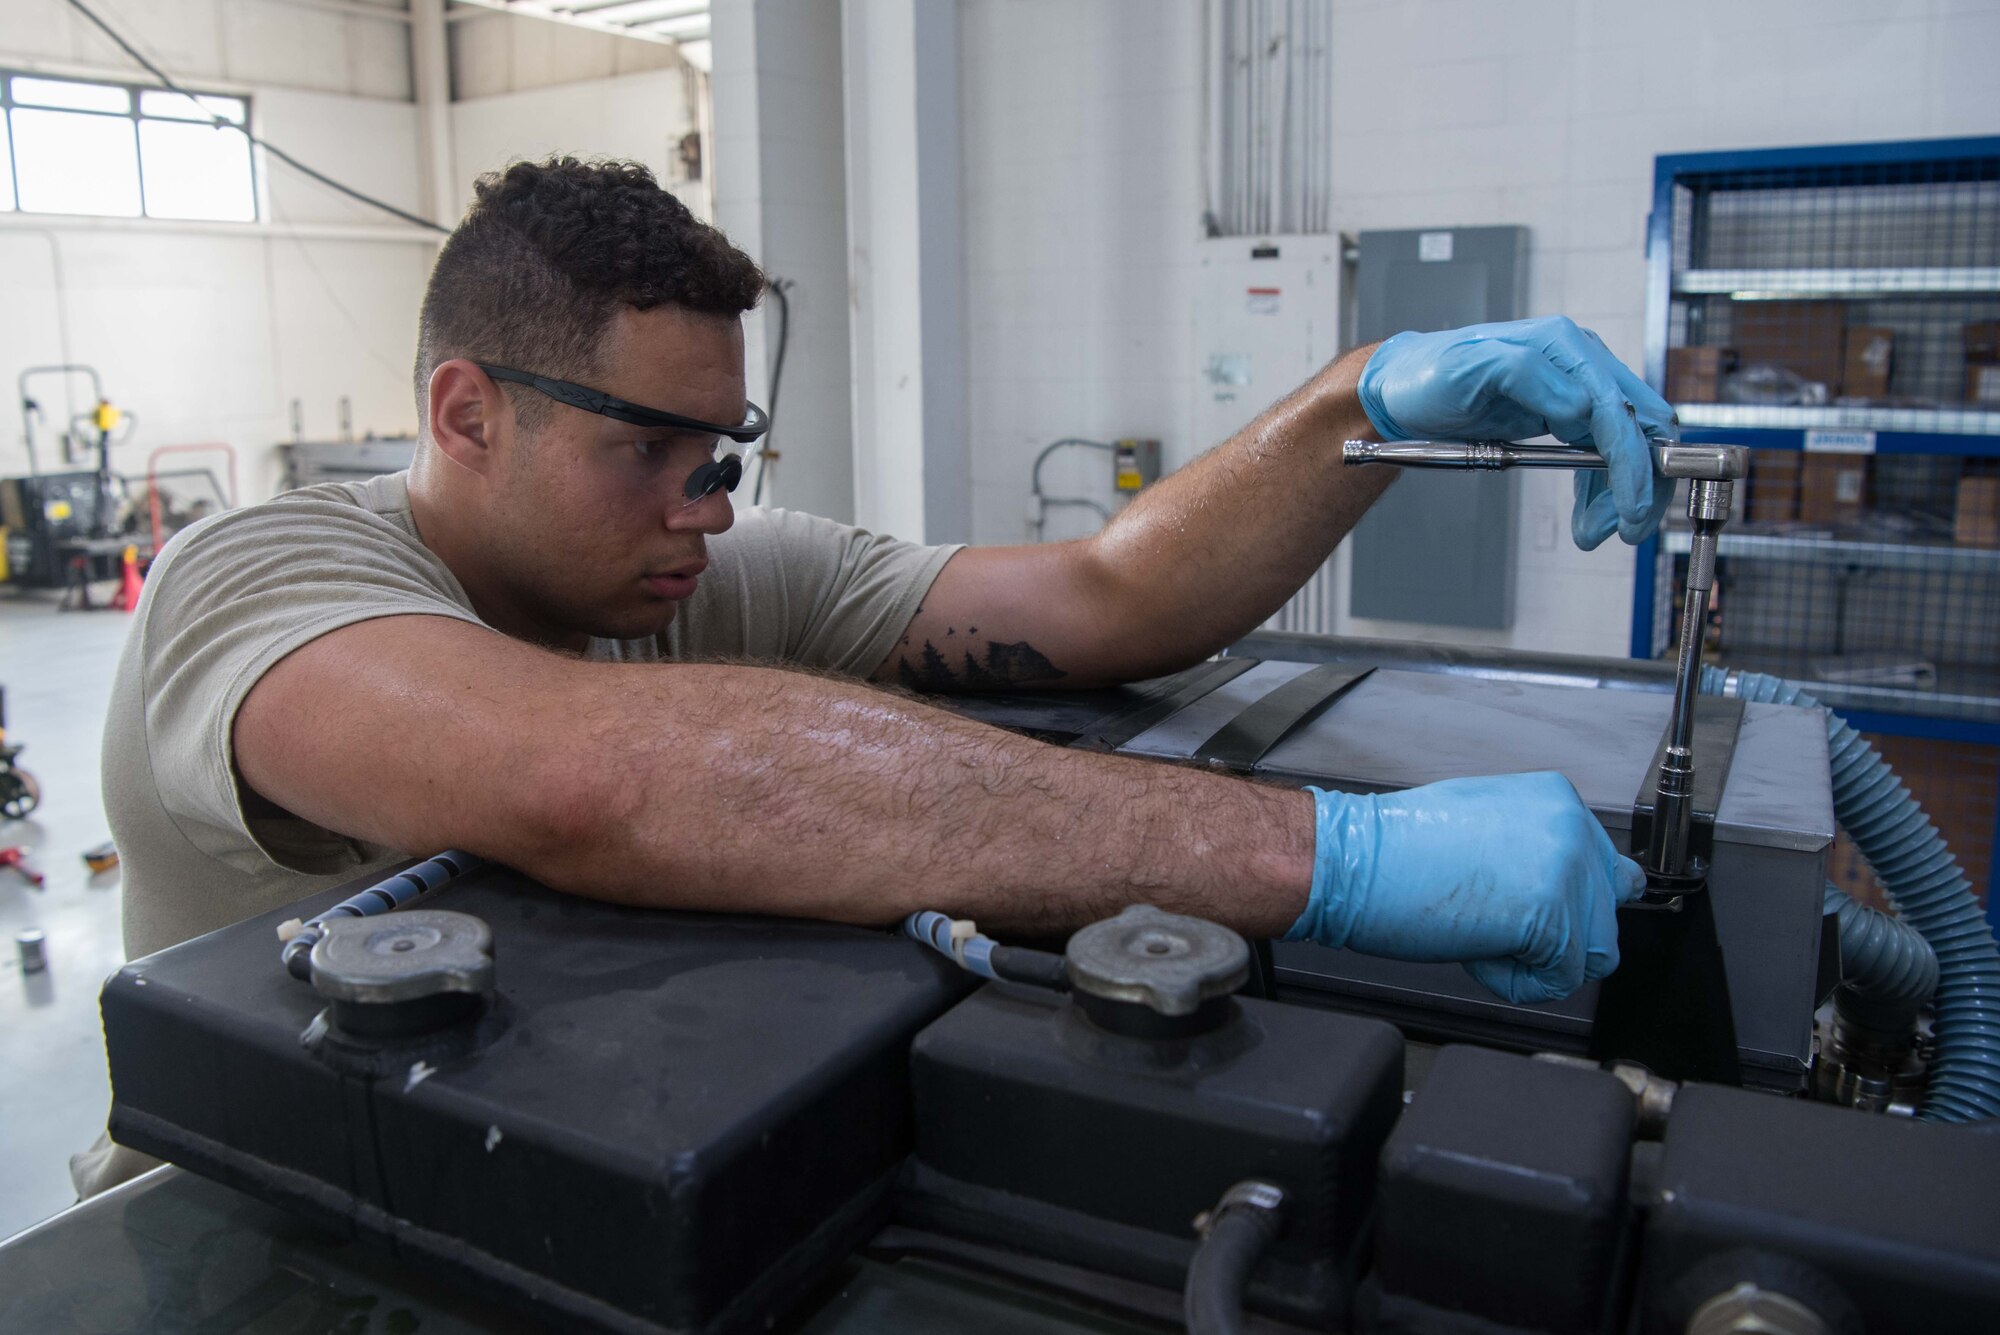 Senior Airman Nicholas Summit, 22nd Maintenance Squadron aerospace ground equipment journeyman, screws a bolt into a self-generating nitrogen cart July 7, 2020, at McConnell Air Force Base, Kansas. AGE has a total of 70 Airmen that are responsible for providing all hydraulic, pneumatic and power support equipment for servicing aircraft on the flightline. (U.S. Air Force photo by Senior Airman Alexi Bosarge)